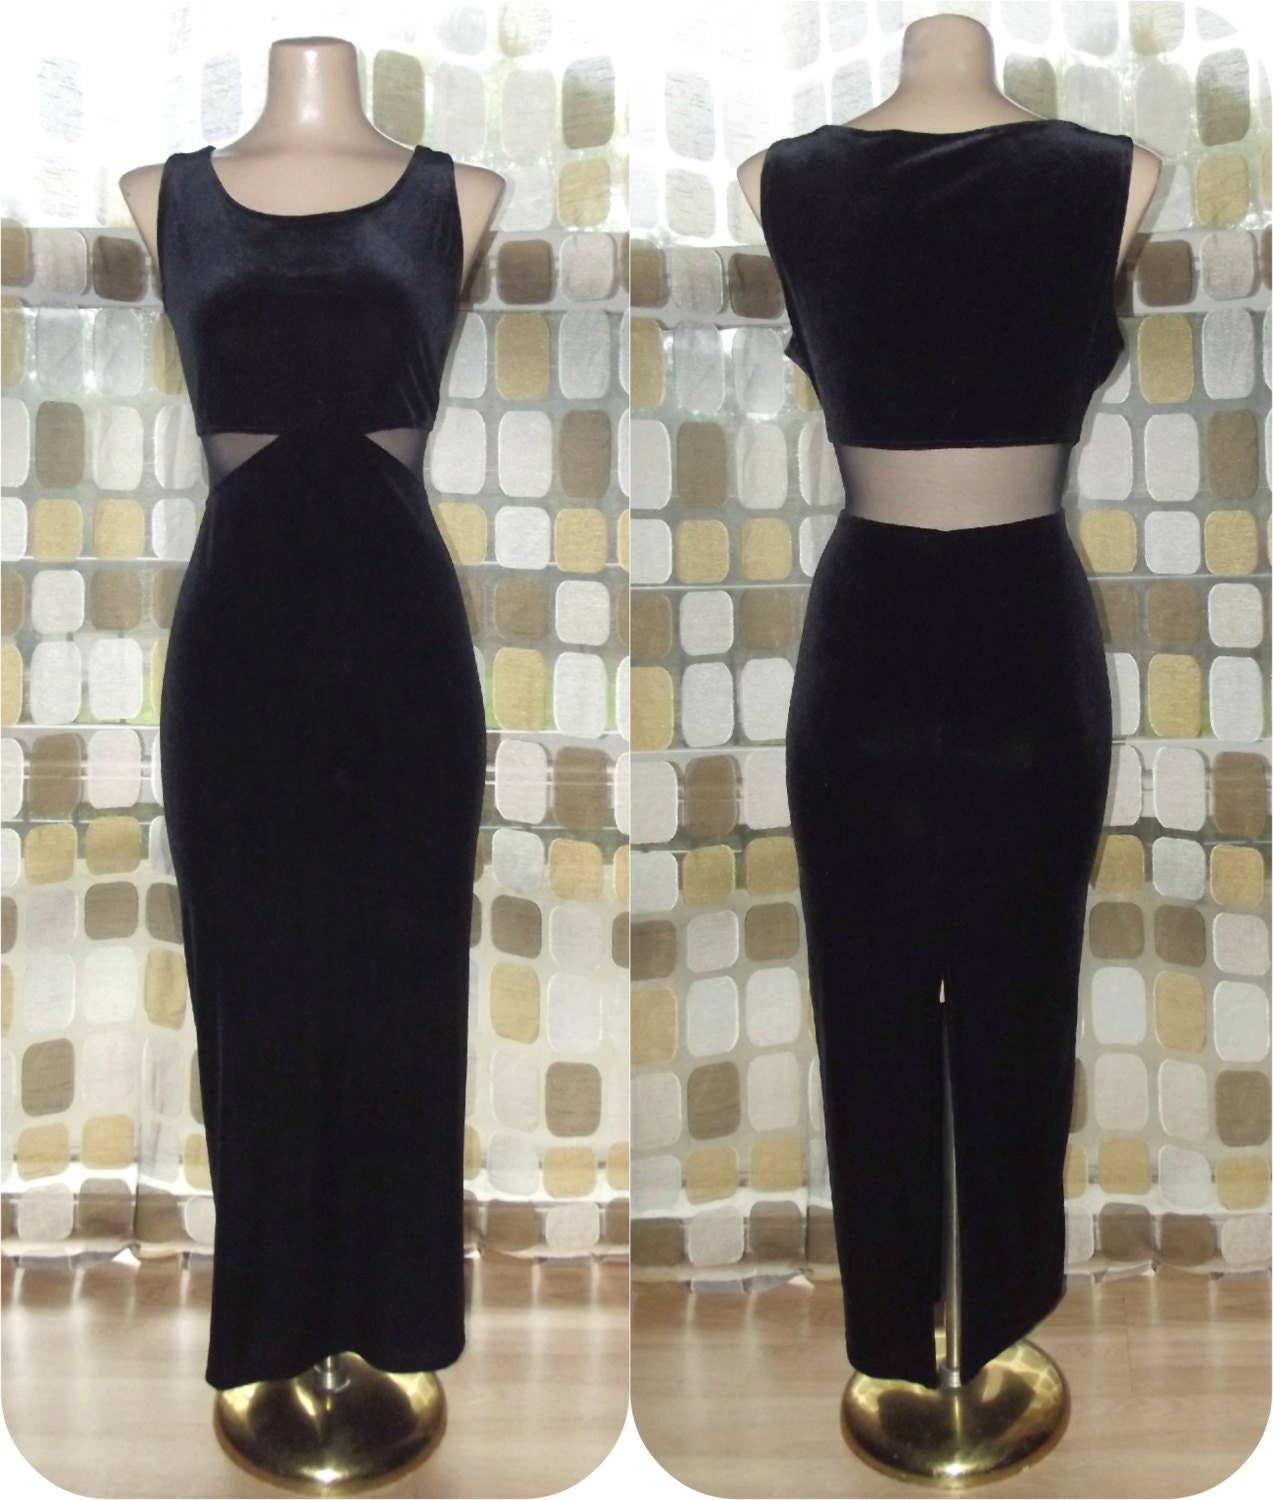 https://www.etsy.com/listing/247454139/vintage-80s-90s-futuristic-mesh-cutout?ga_search_query=formal+dress&ref=shop_items_search_3